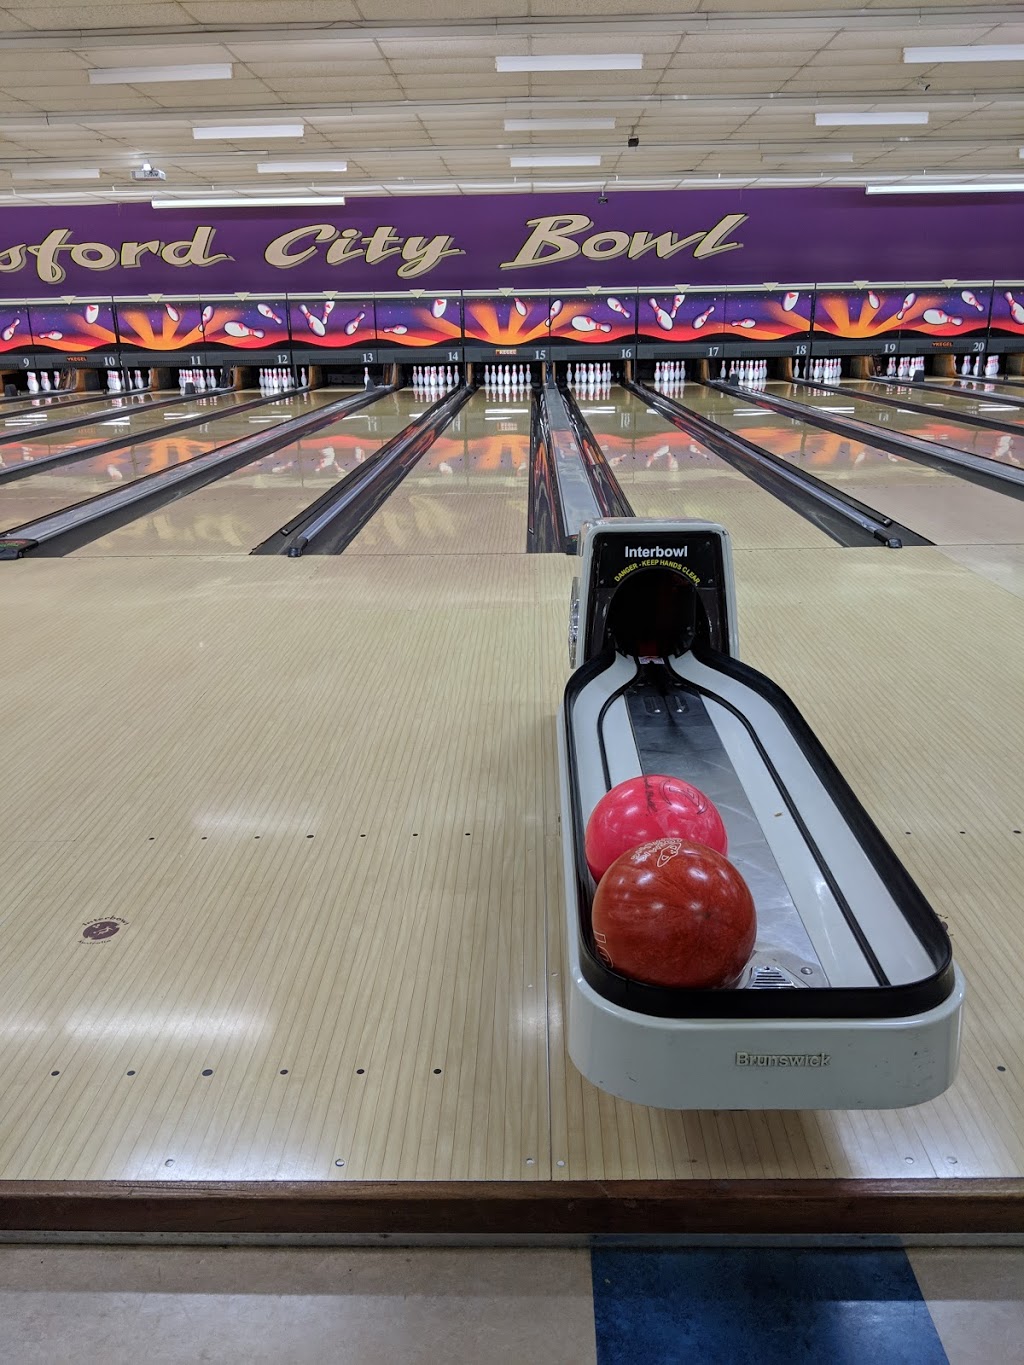 Gosford City Bowl | bowling alley | 10 Brooks Ave, Wyoming NSW 2250, Australia | 0243283133 OR +61 2 4328 3133